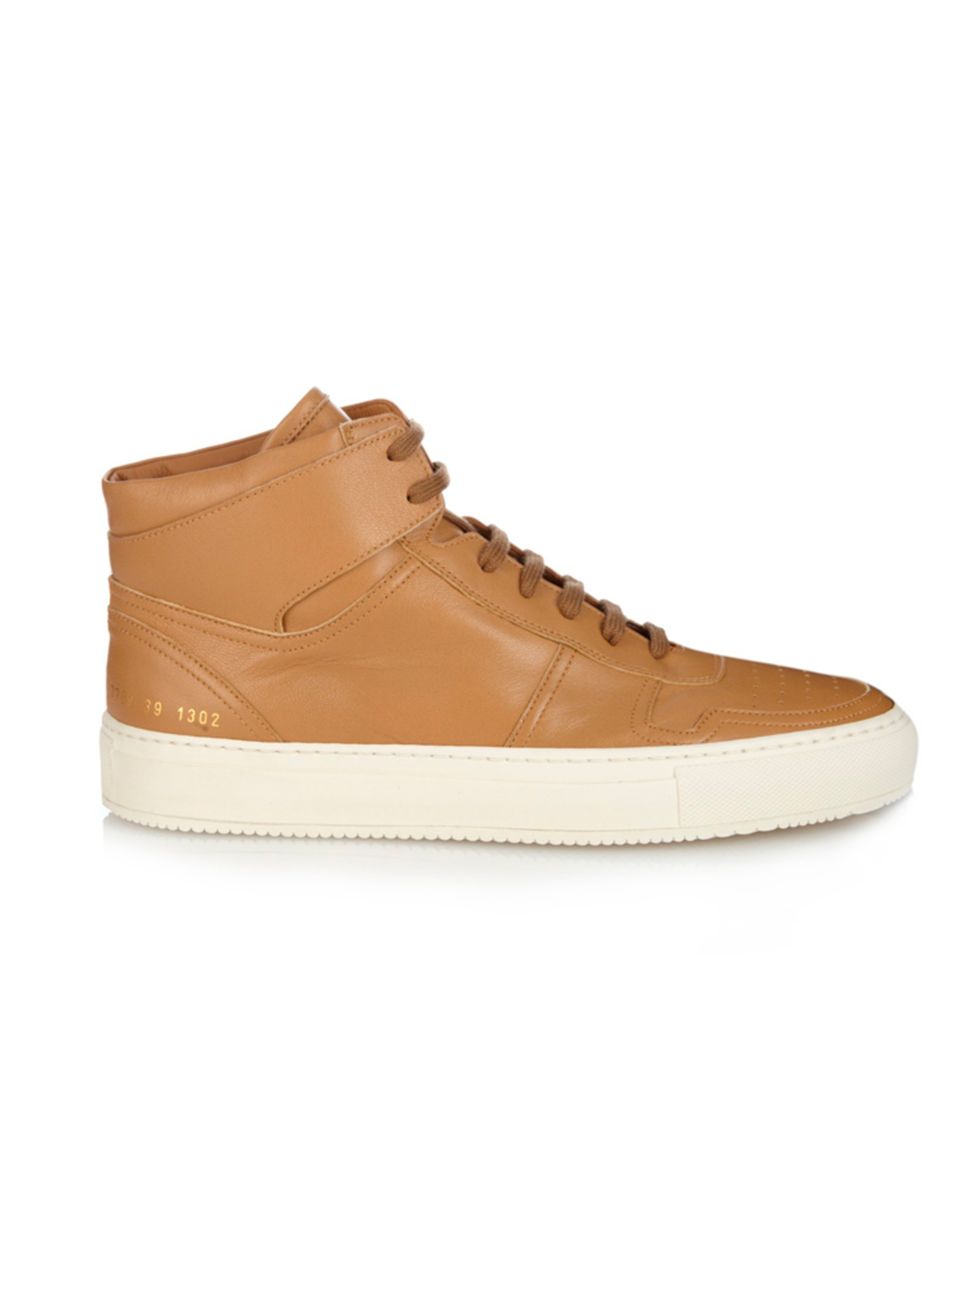 <p>Common Projects trainers, £325, from <a href="http://www.matchesfashion.com/products/Common-Projects-Bball-leather-high-top-trainers-1025751" target="_blank">Matchesfashion.com</a></p>